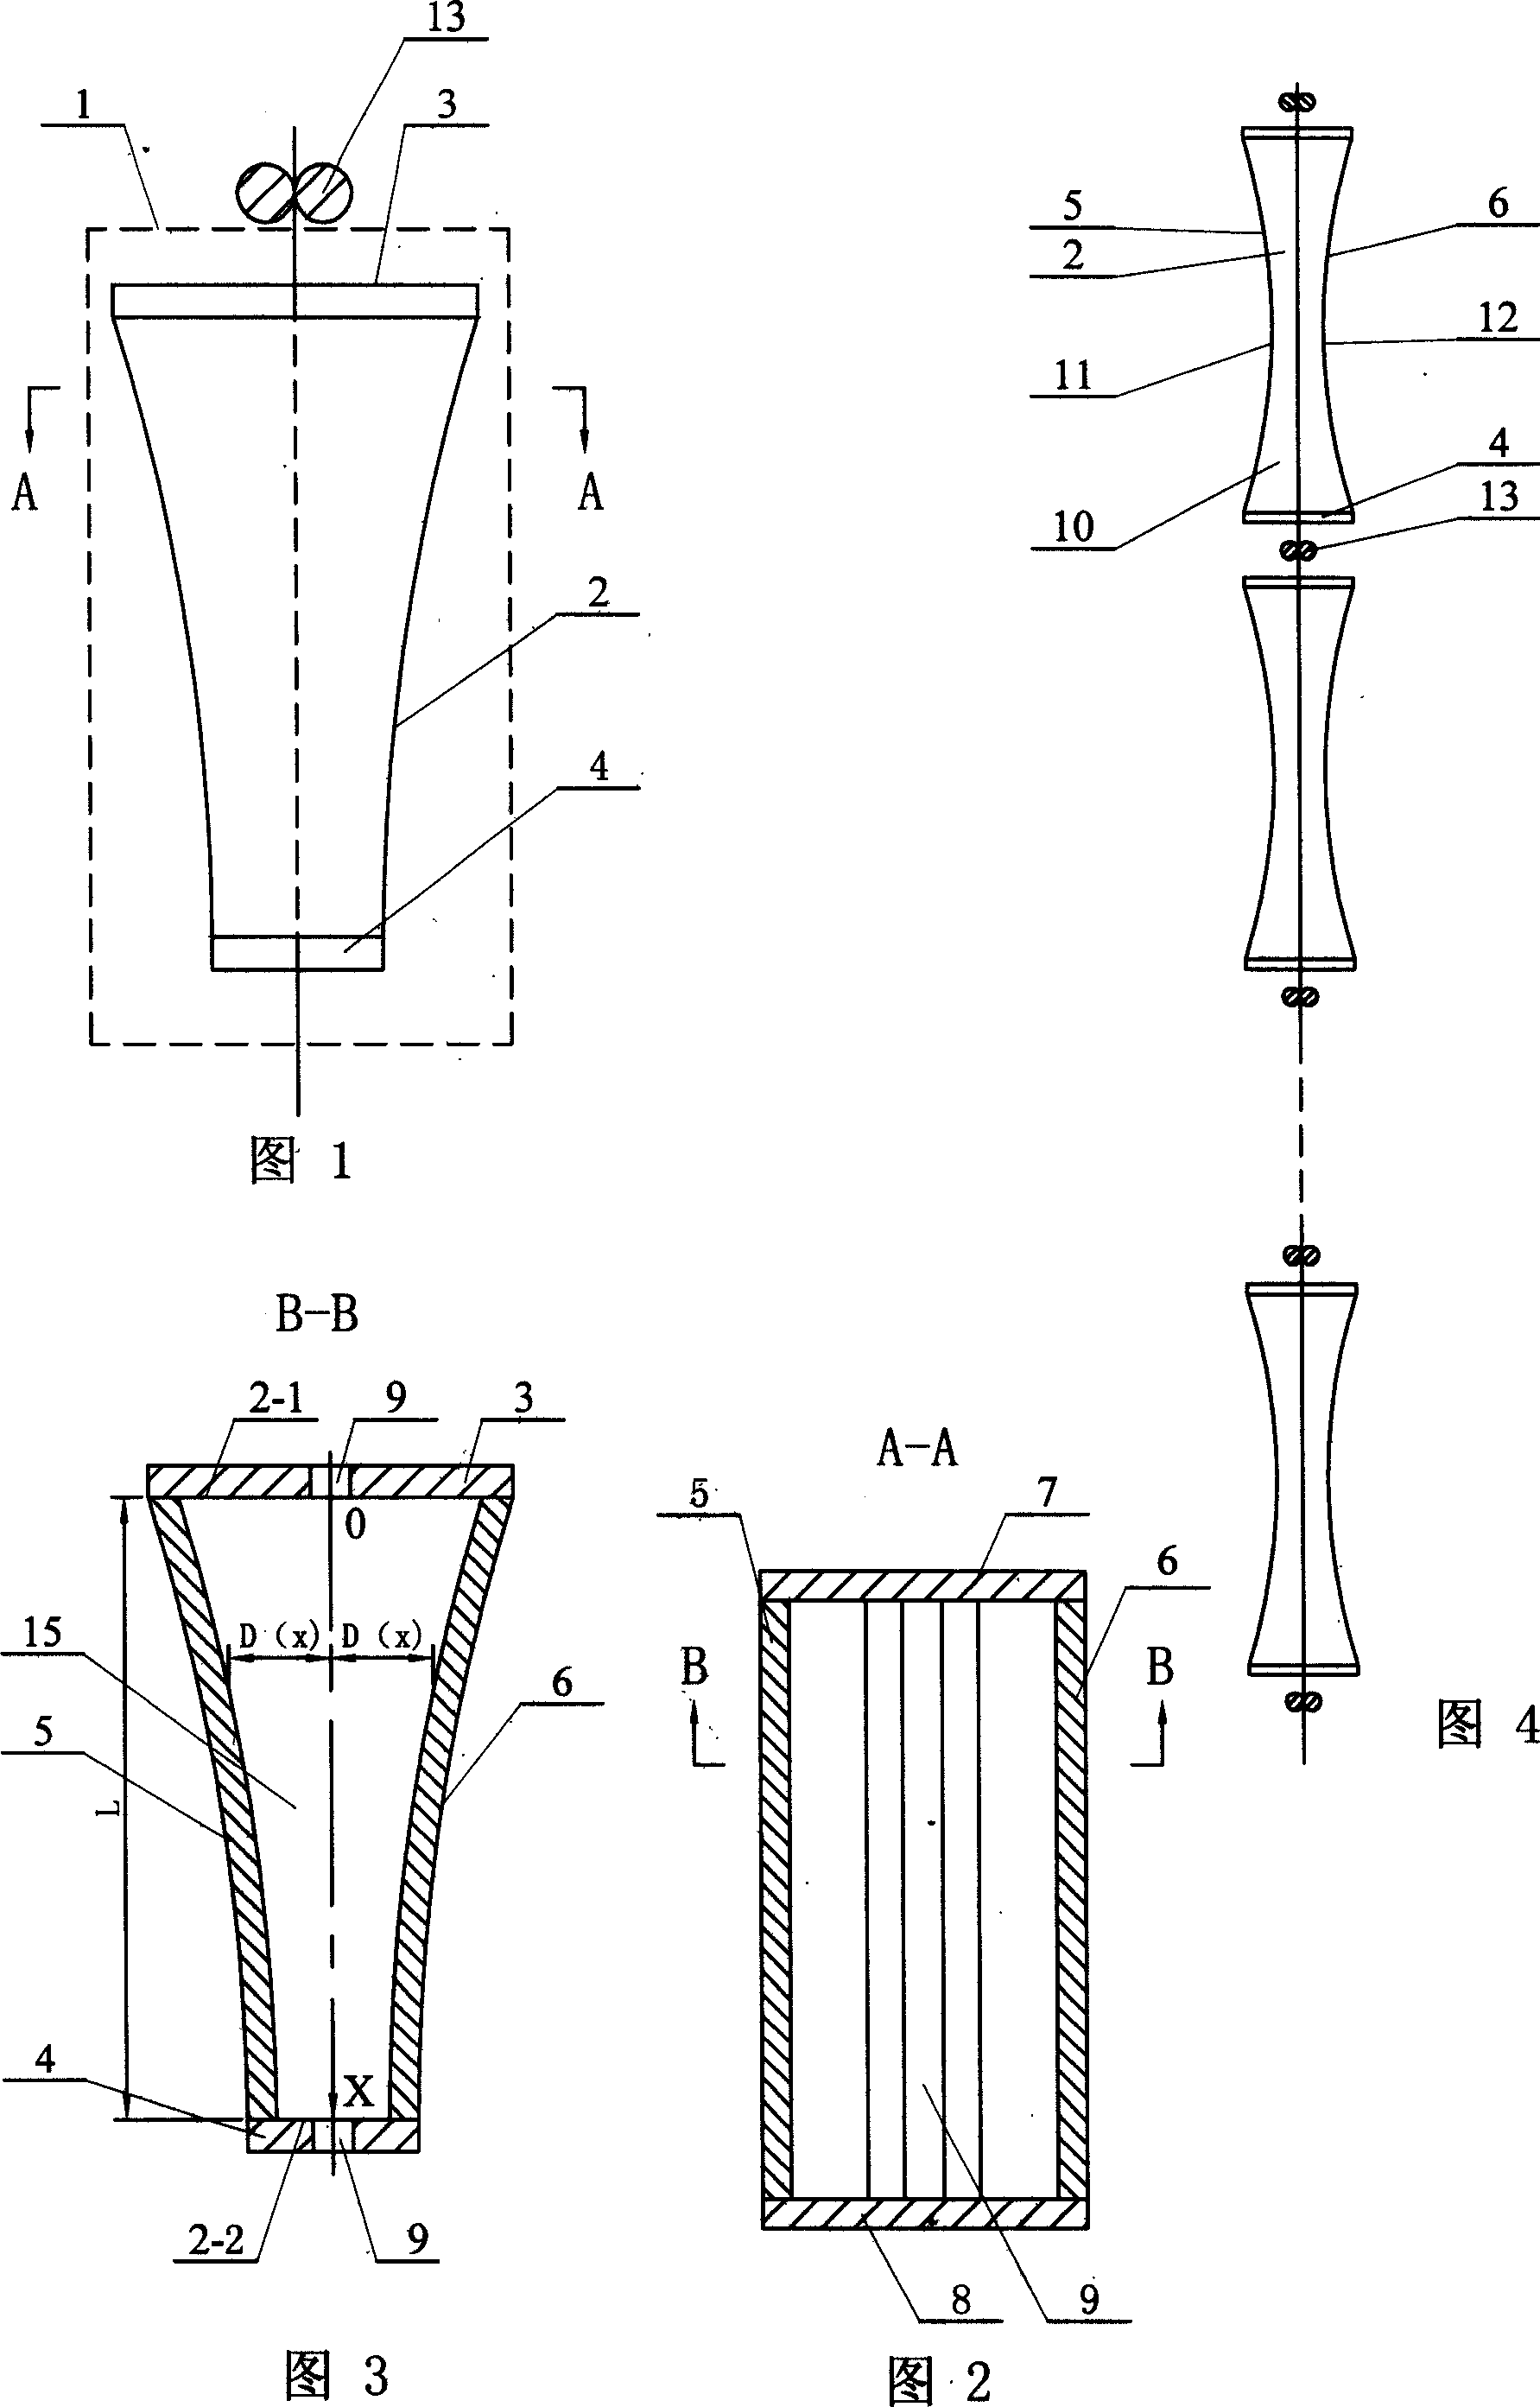 Anode unit for continuous electroplating of belt poor conductor